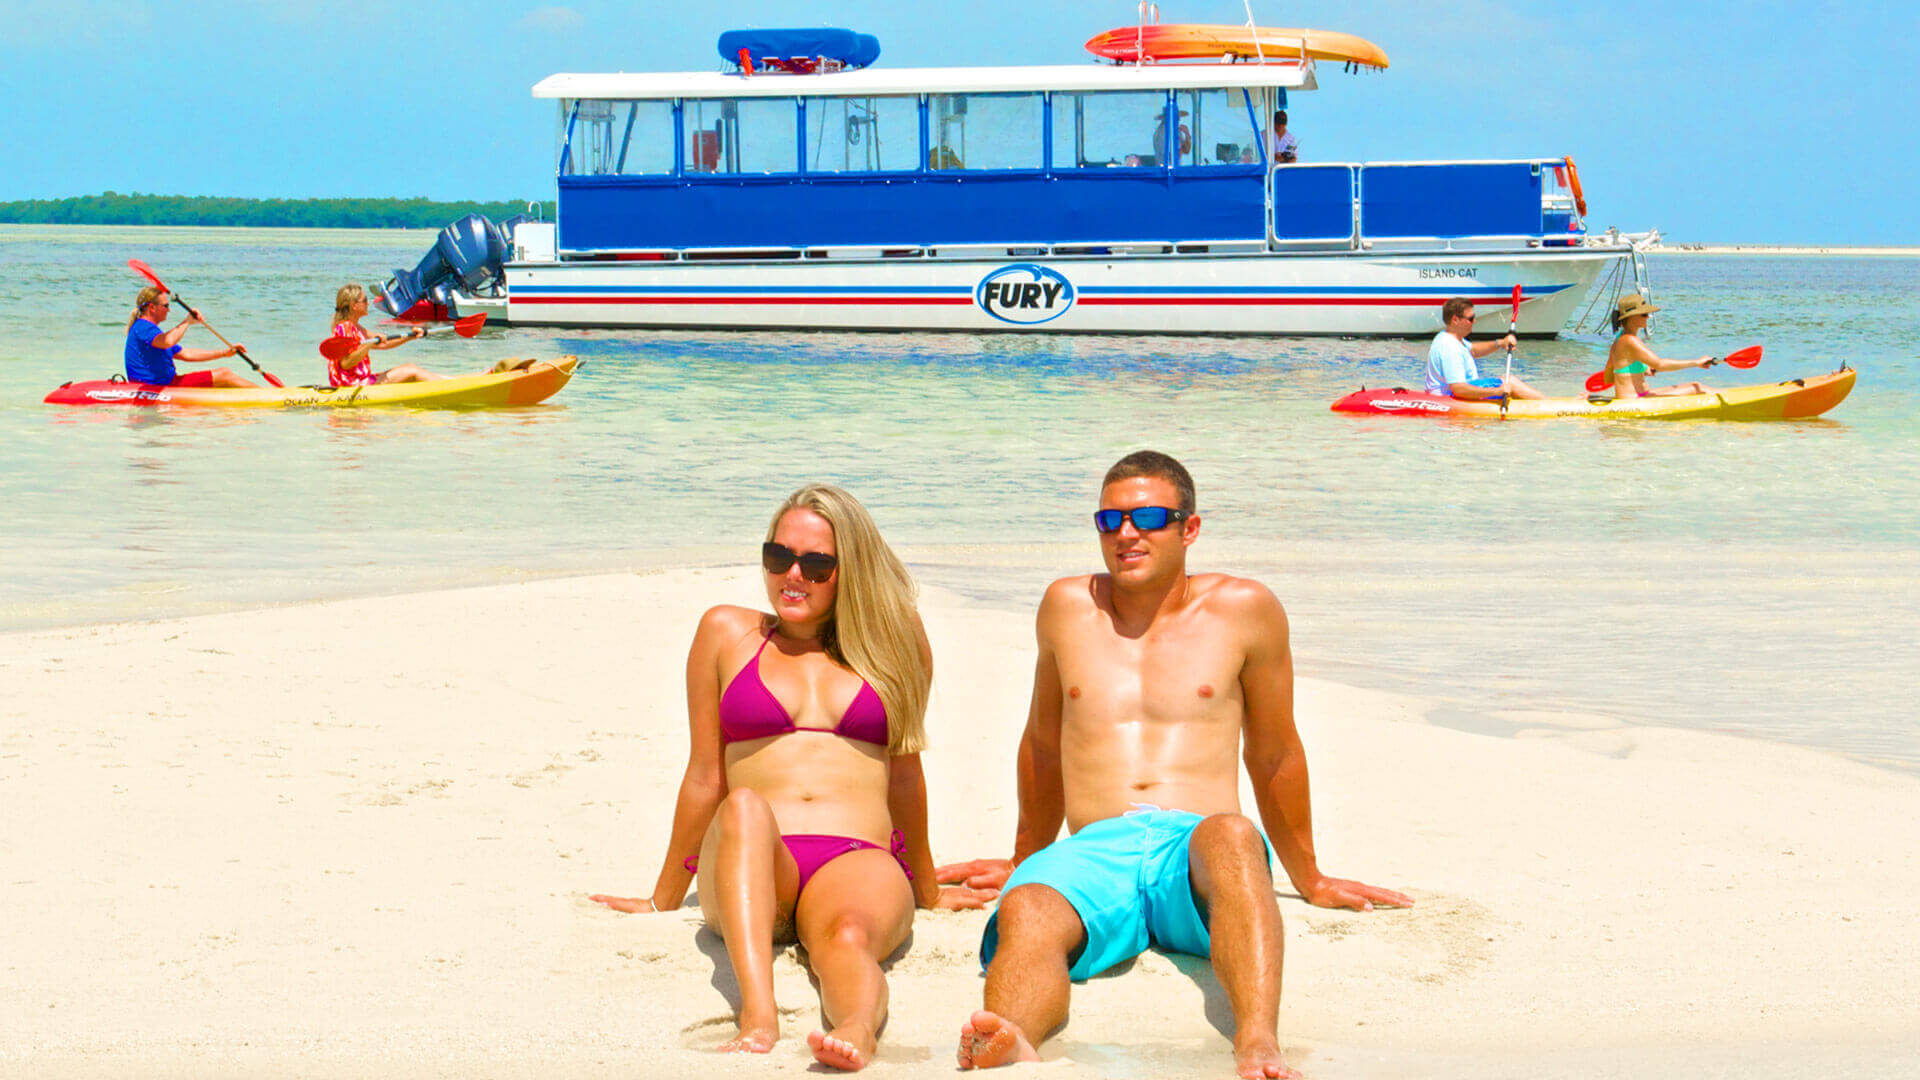 Image of couple relaxing on the sand during the Fury Island Adventure Tour